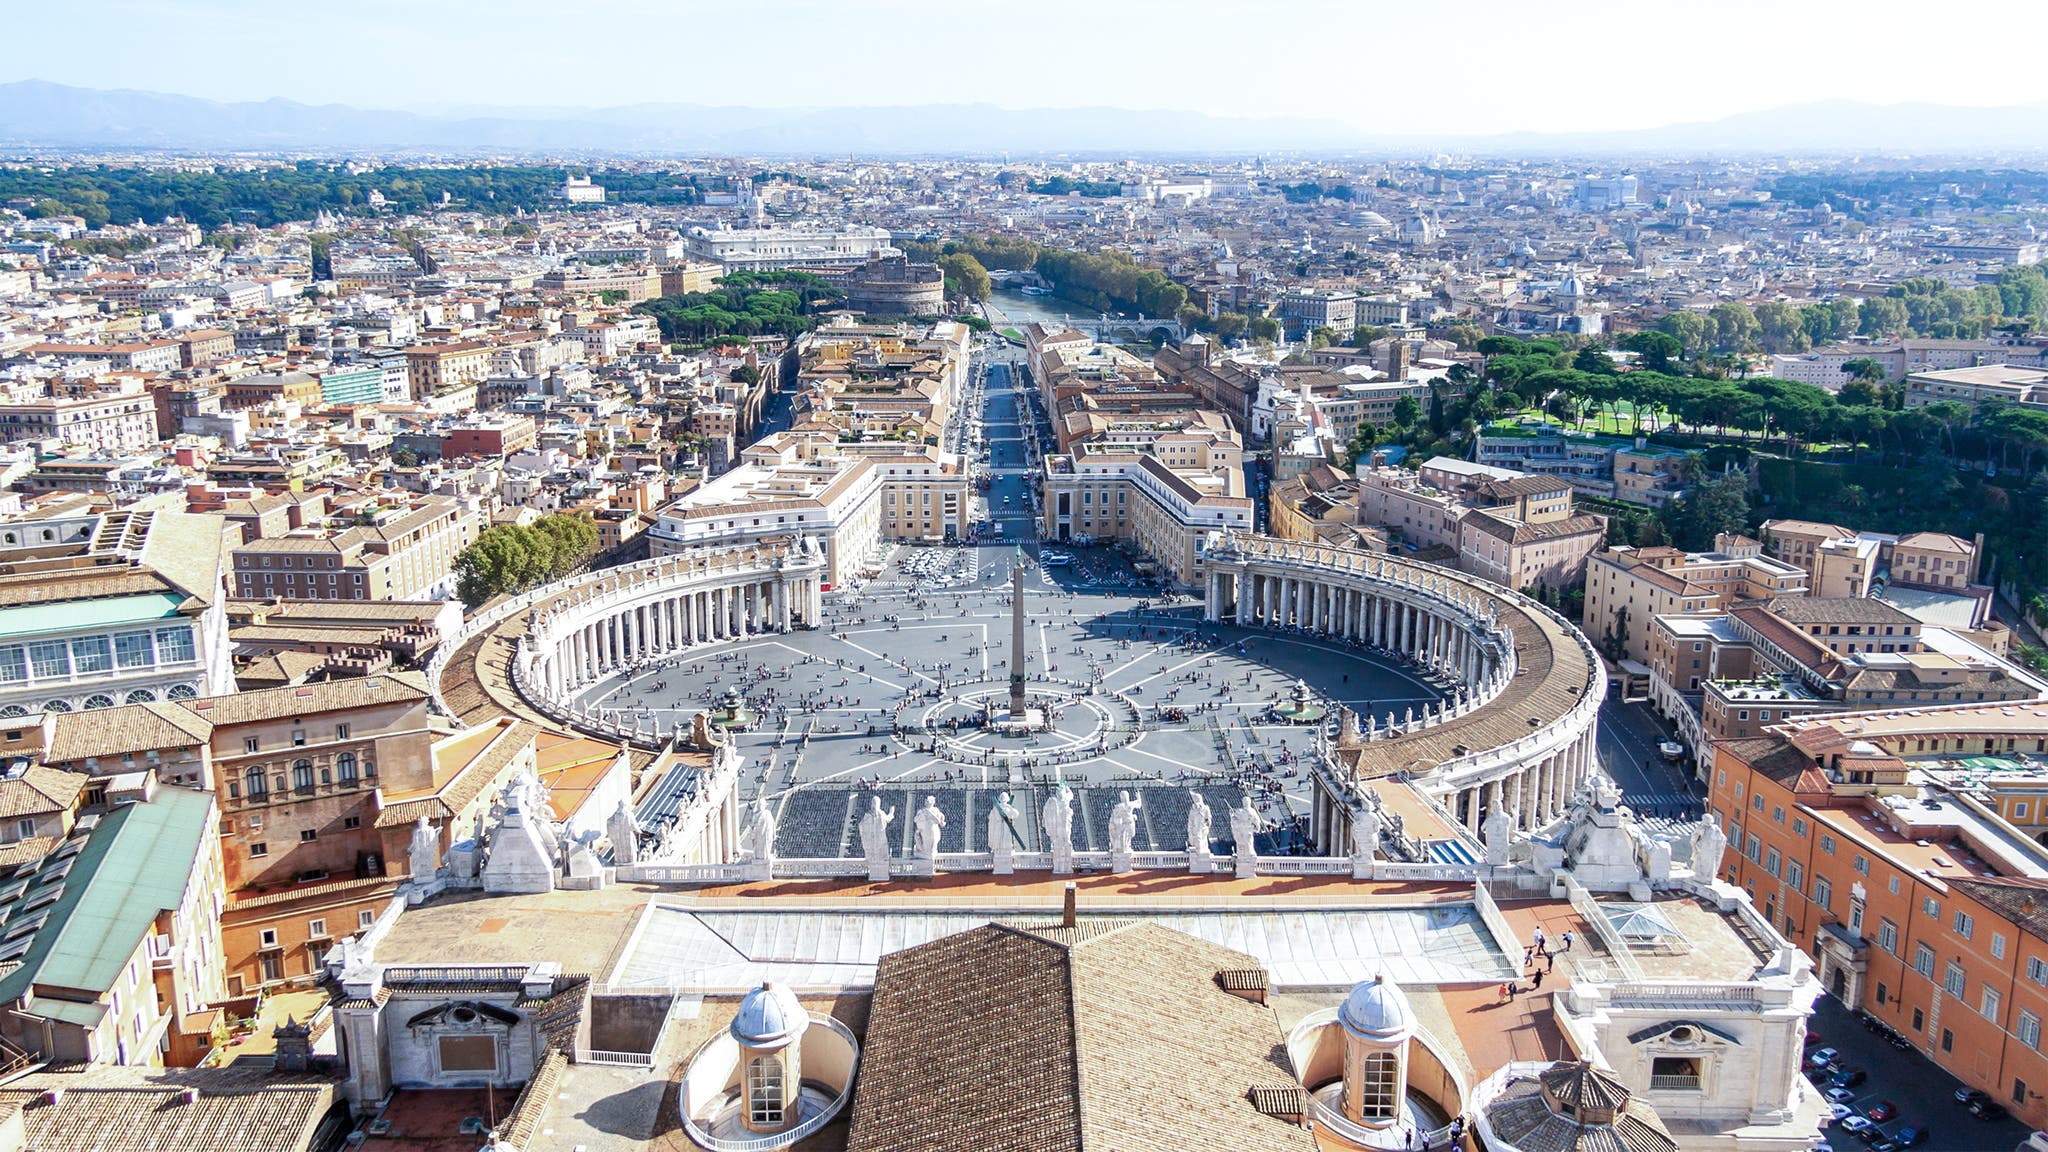 View from the Cupola of St Peter's Basilica in the Vatican